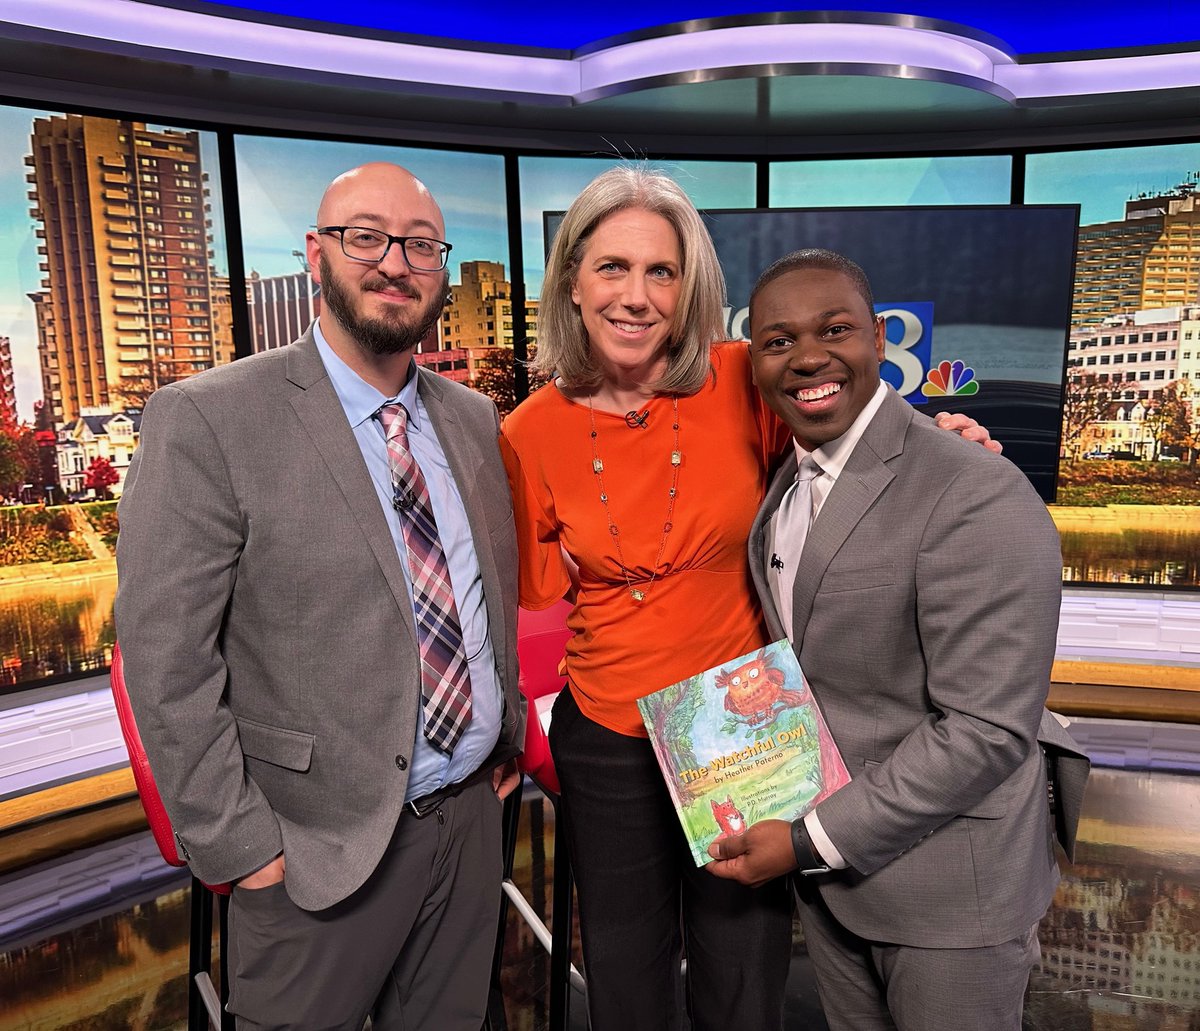 THANK YOU @MichaelFullertv @WGALNews for spotlighting #TheWatchfulOwl, our NEW children's book! It's an allegory of the journey #fosterchildren make and how EACH OF US with CASA can help them find a permanent, safe home!  💙 #courtadvocacy #ChangeTheirStory